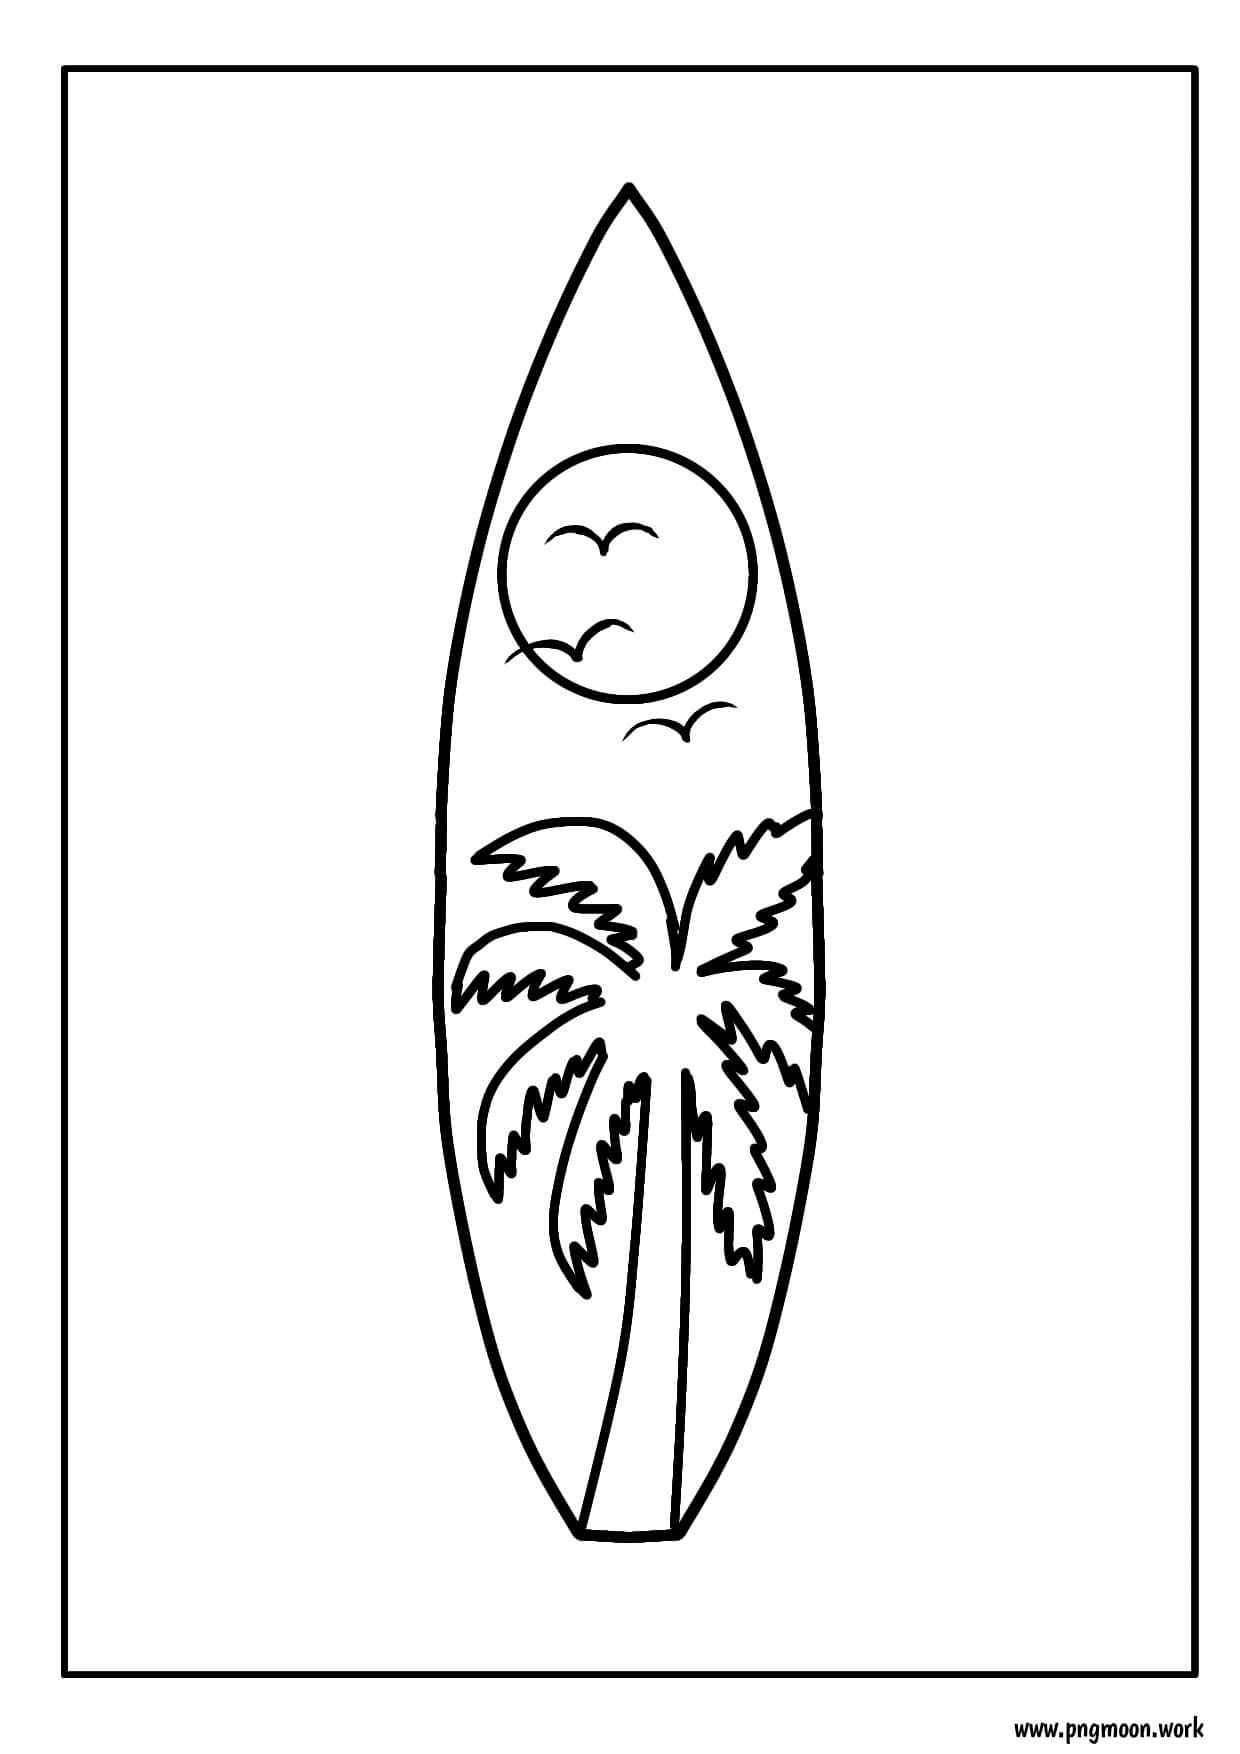 Top surfboard coloring pages dolphin coloring pages beach coloring pages coloring pages